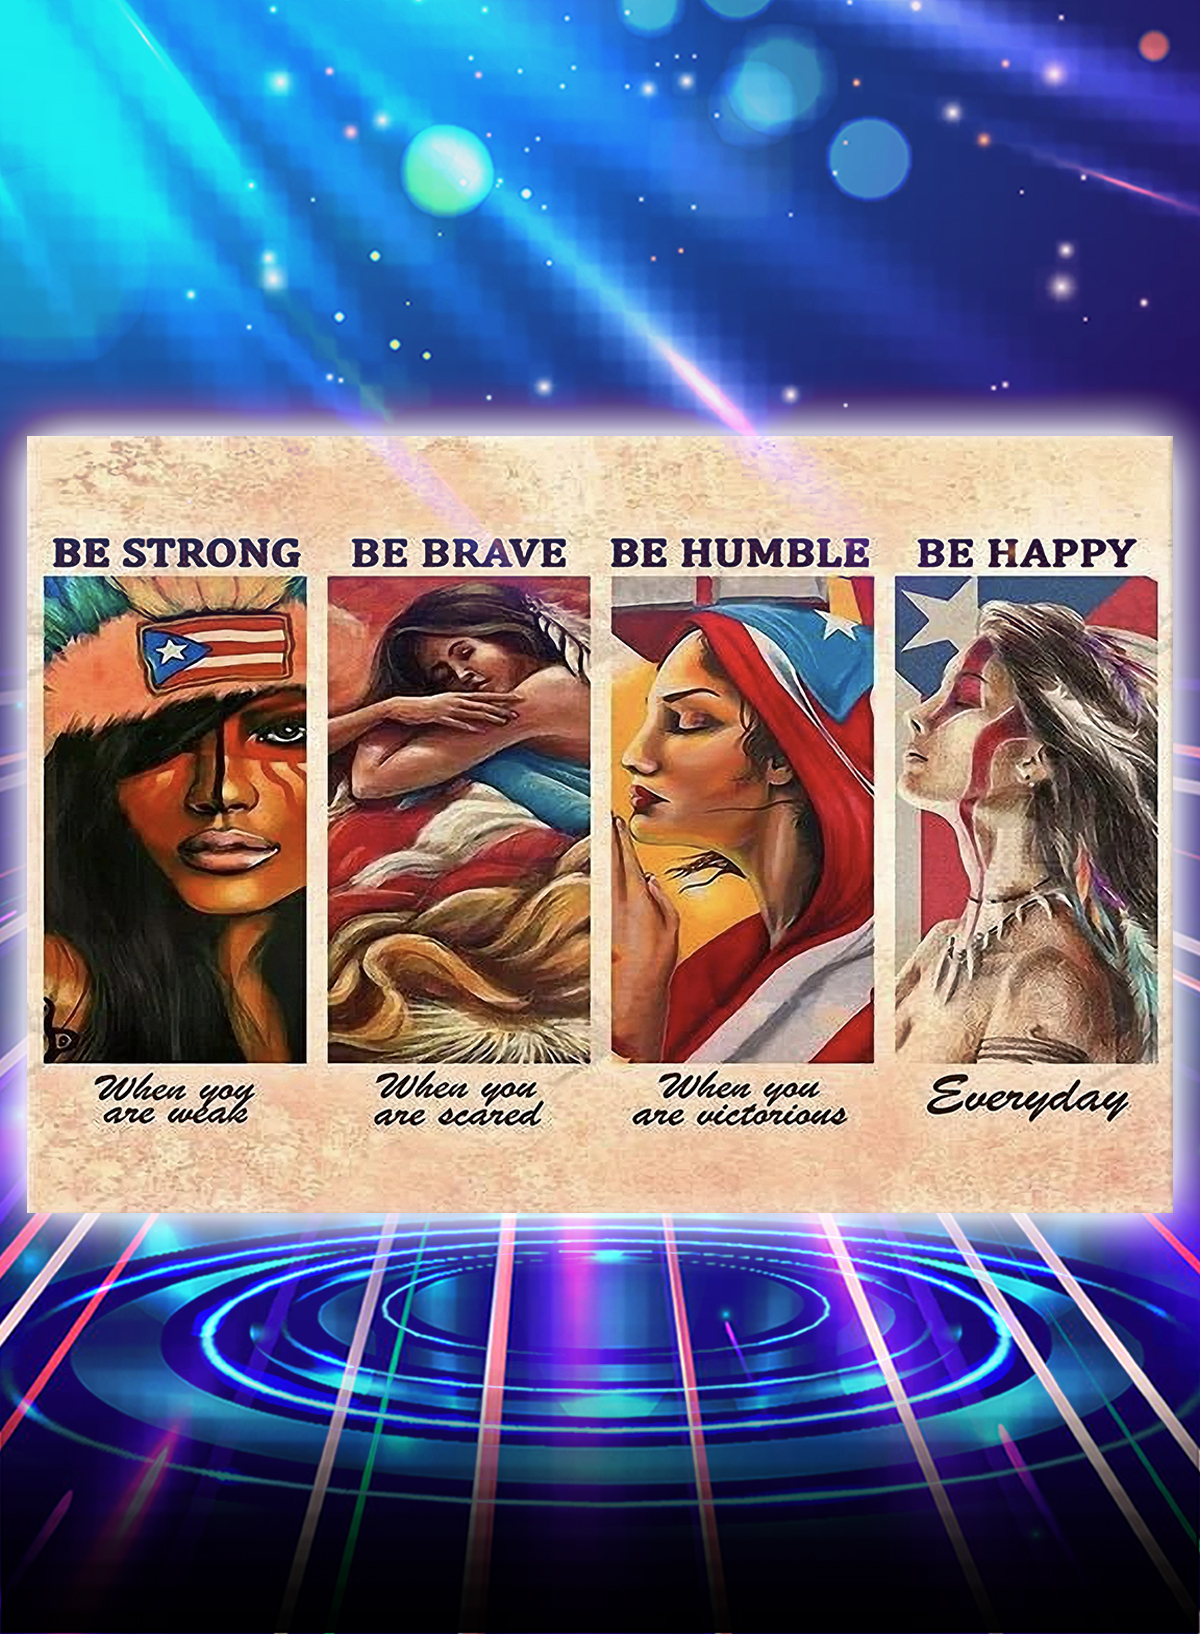 Puerto rico girls be strong be brave be humble be happy poster